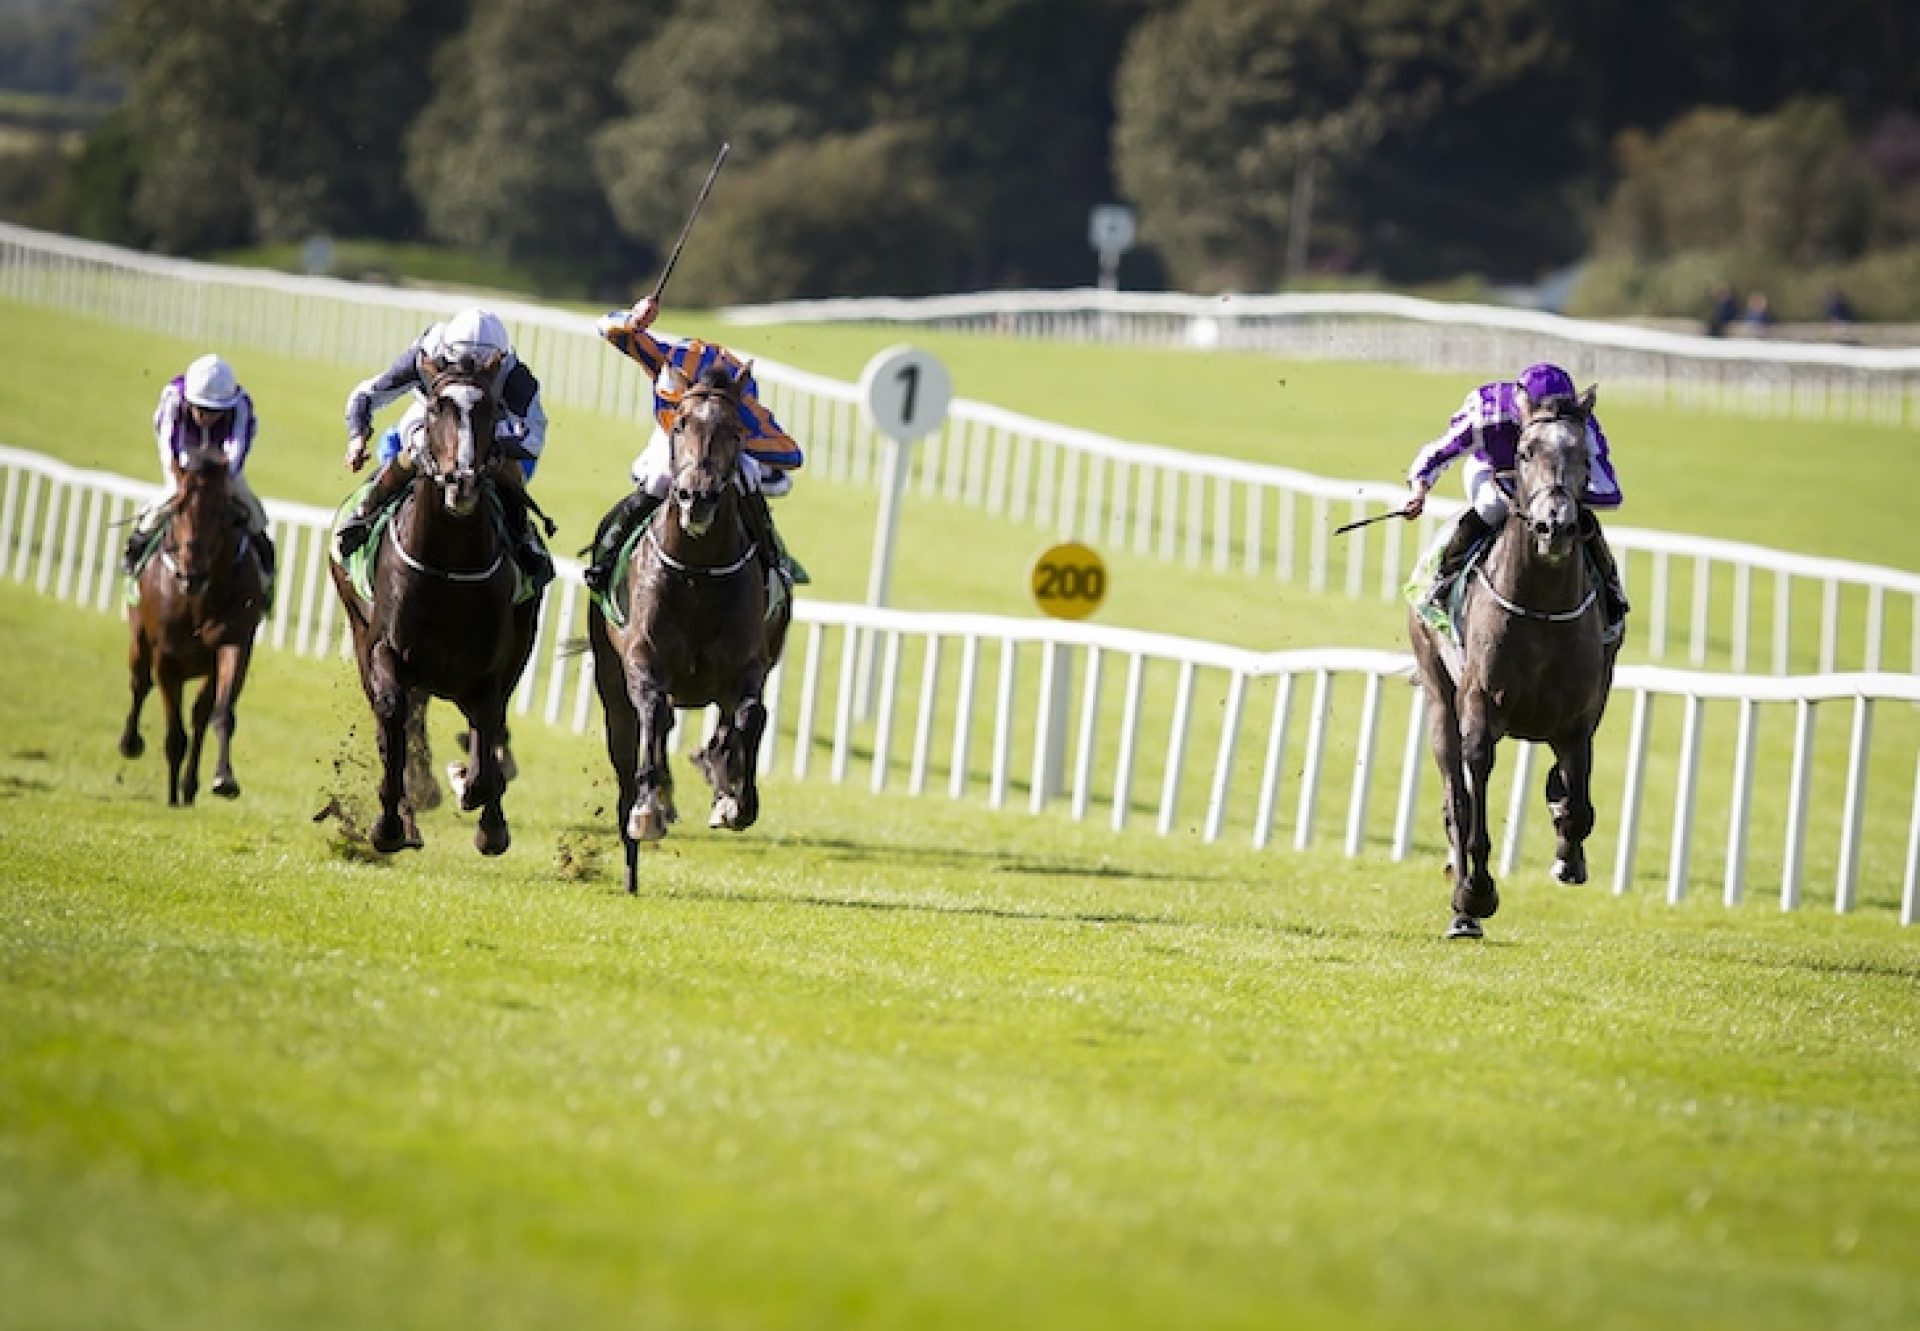 Capri winning the Gr.2 Beresford Stakes at the Curragh